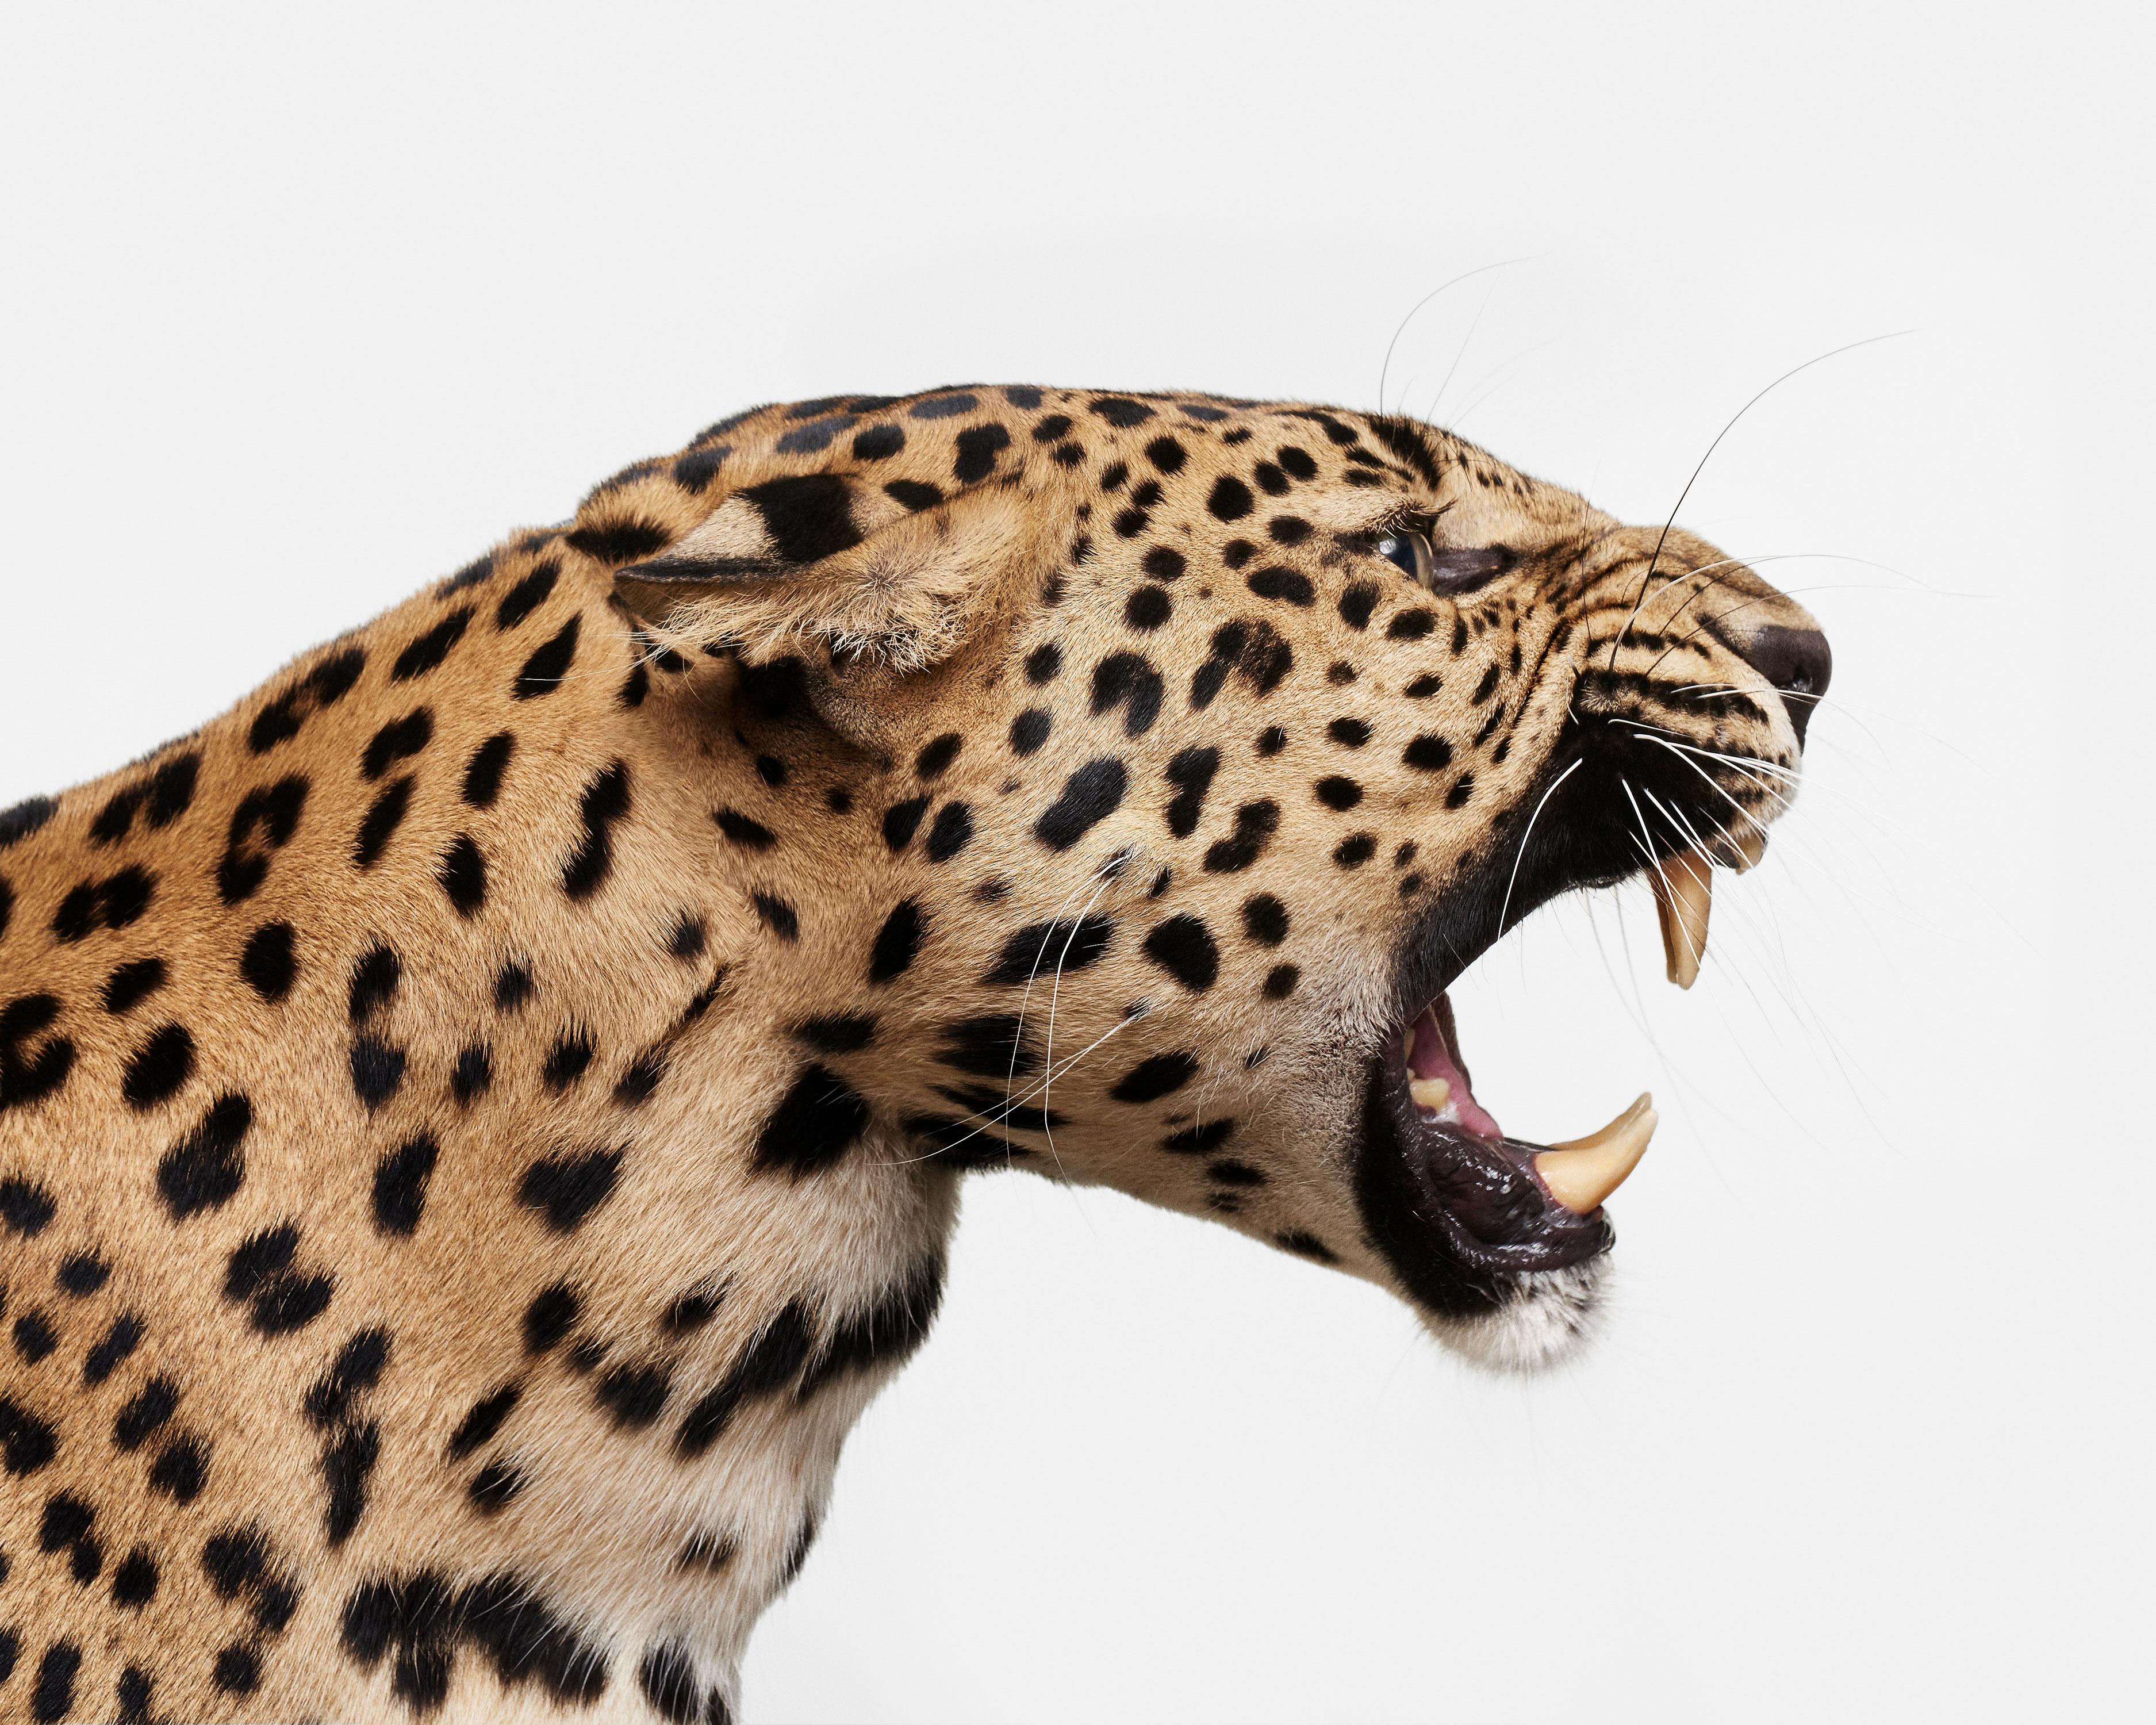 Randal Ford - Spotted Leopard Snarl, Photography 2018, Printed After